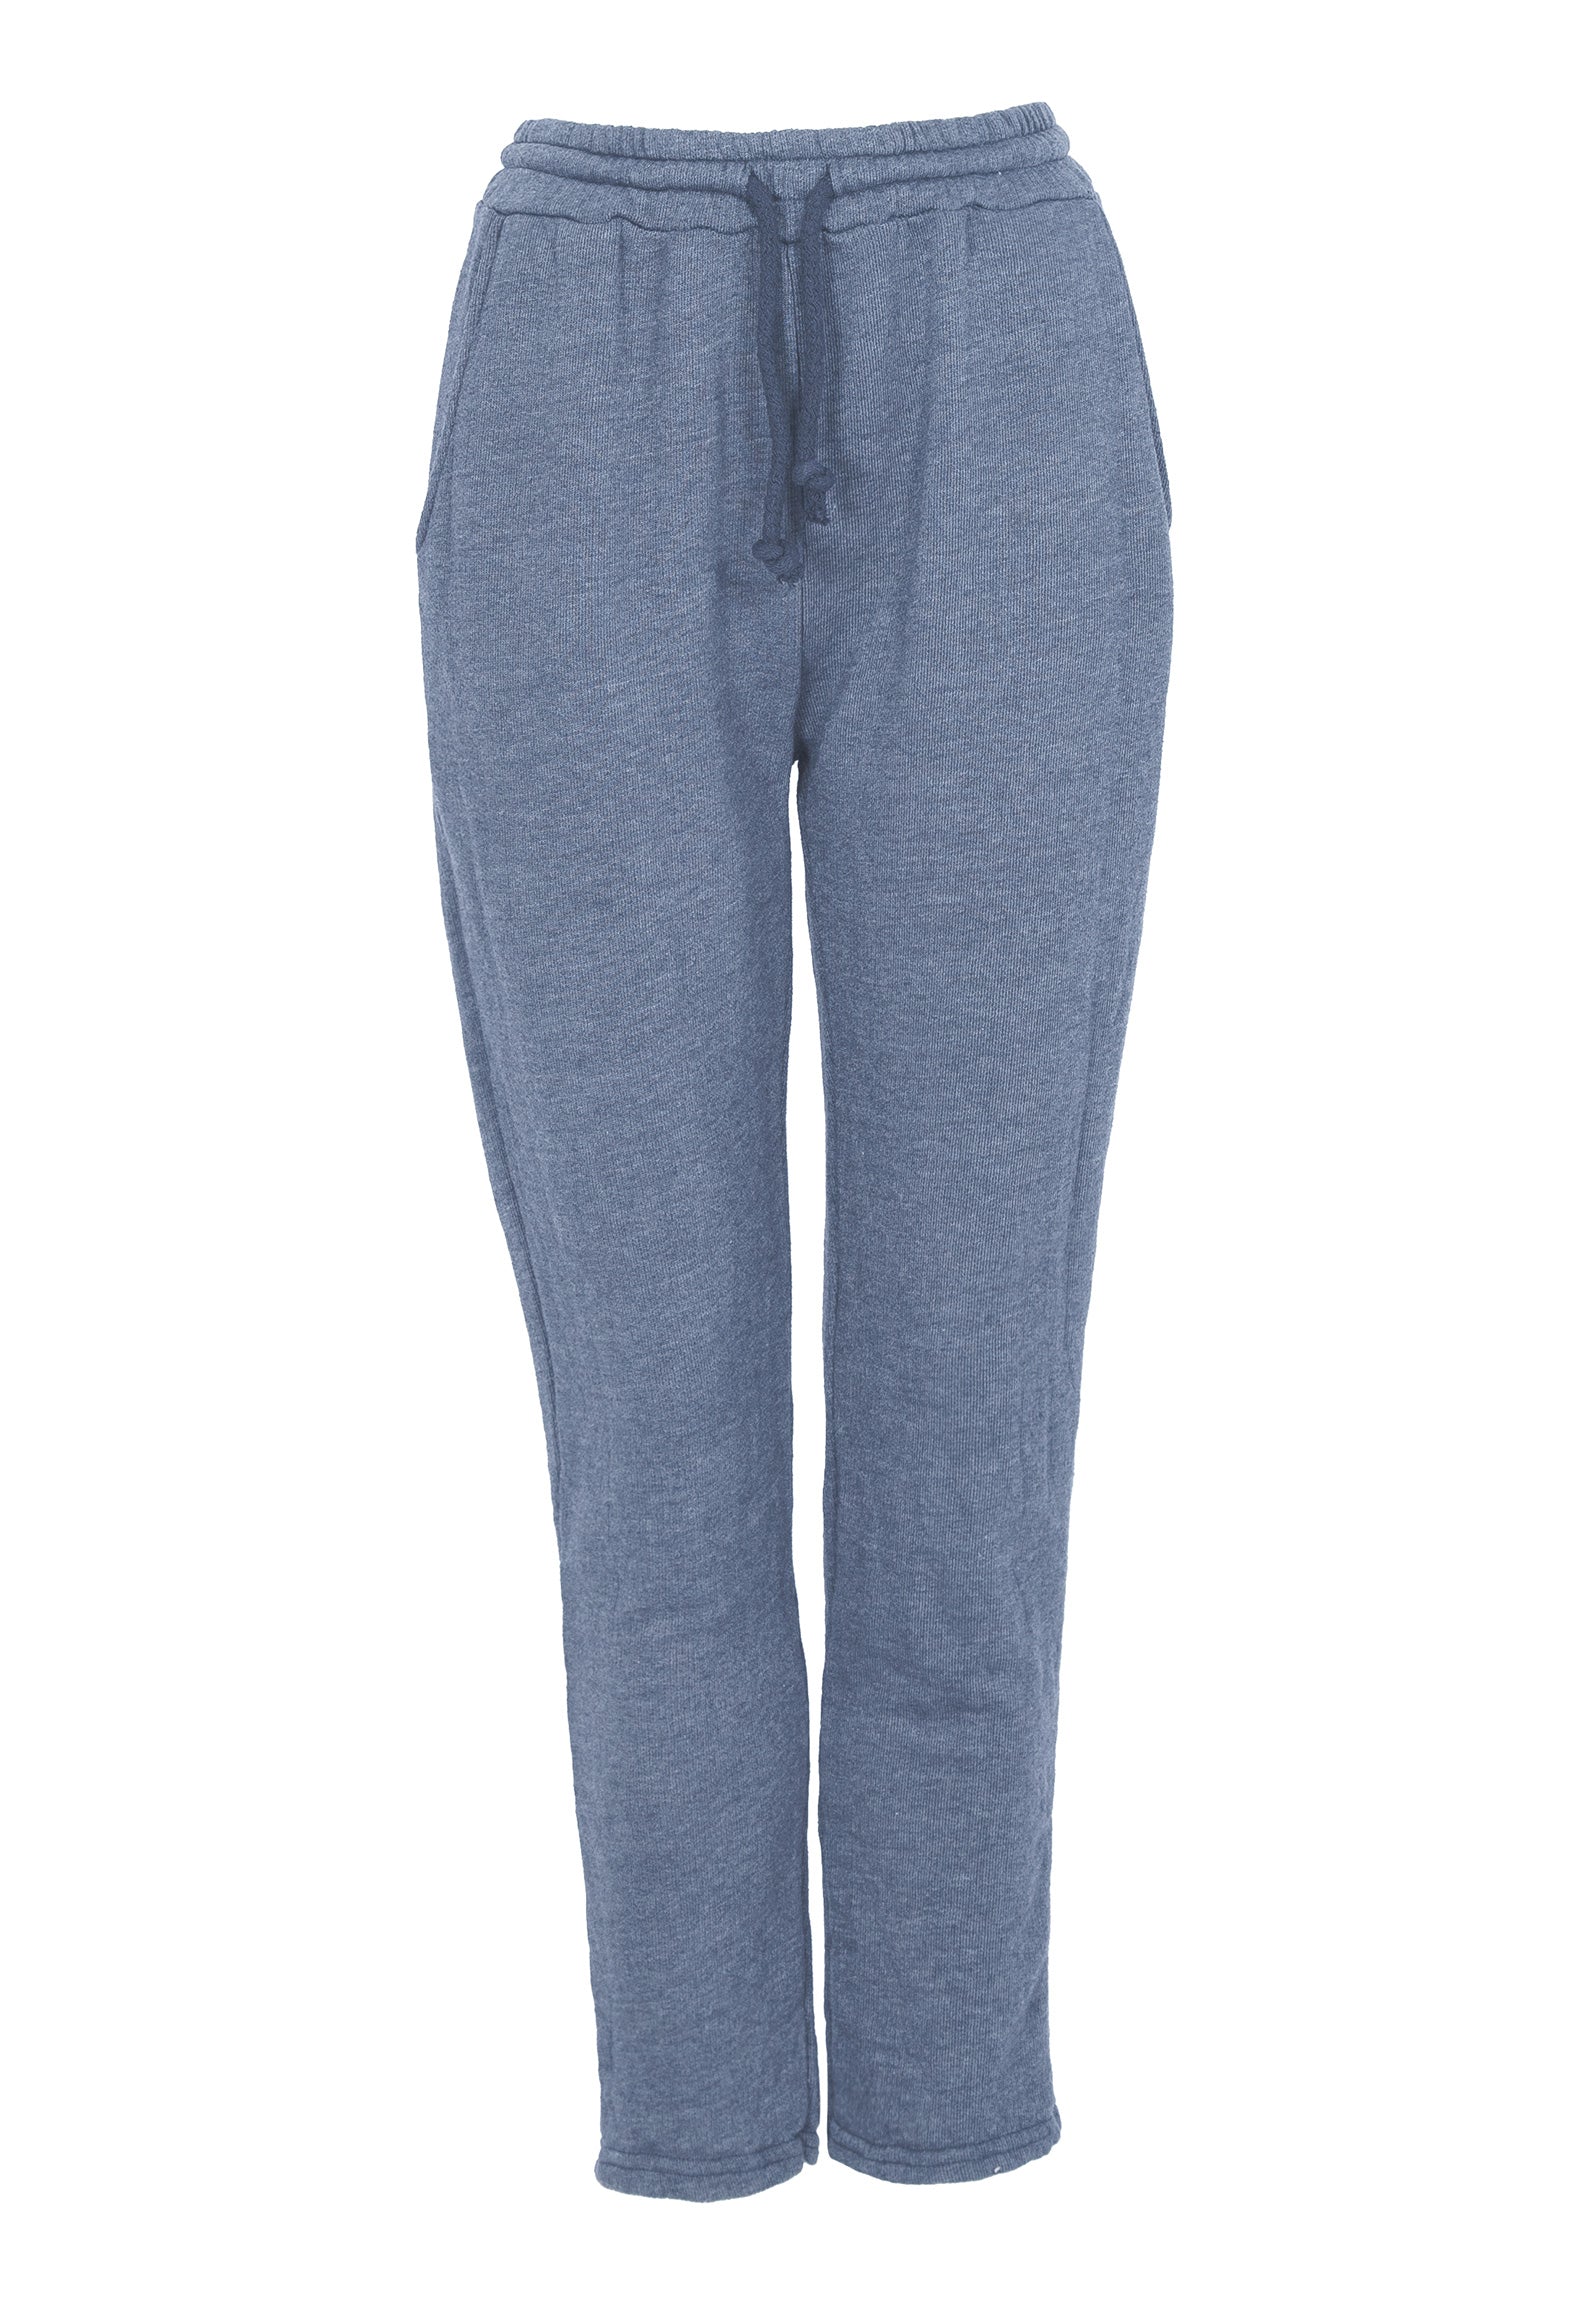 Women’s Sophia Pant Grey Extra Small By Ridley